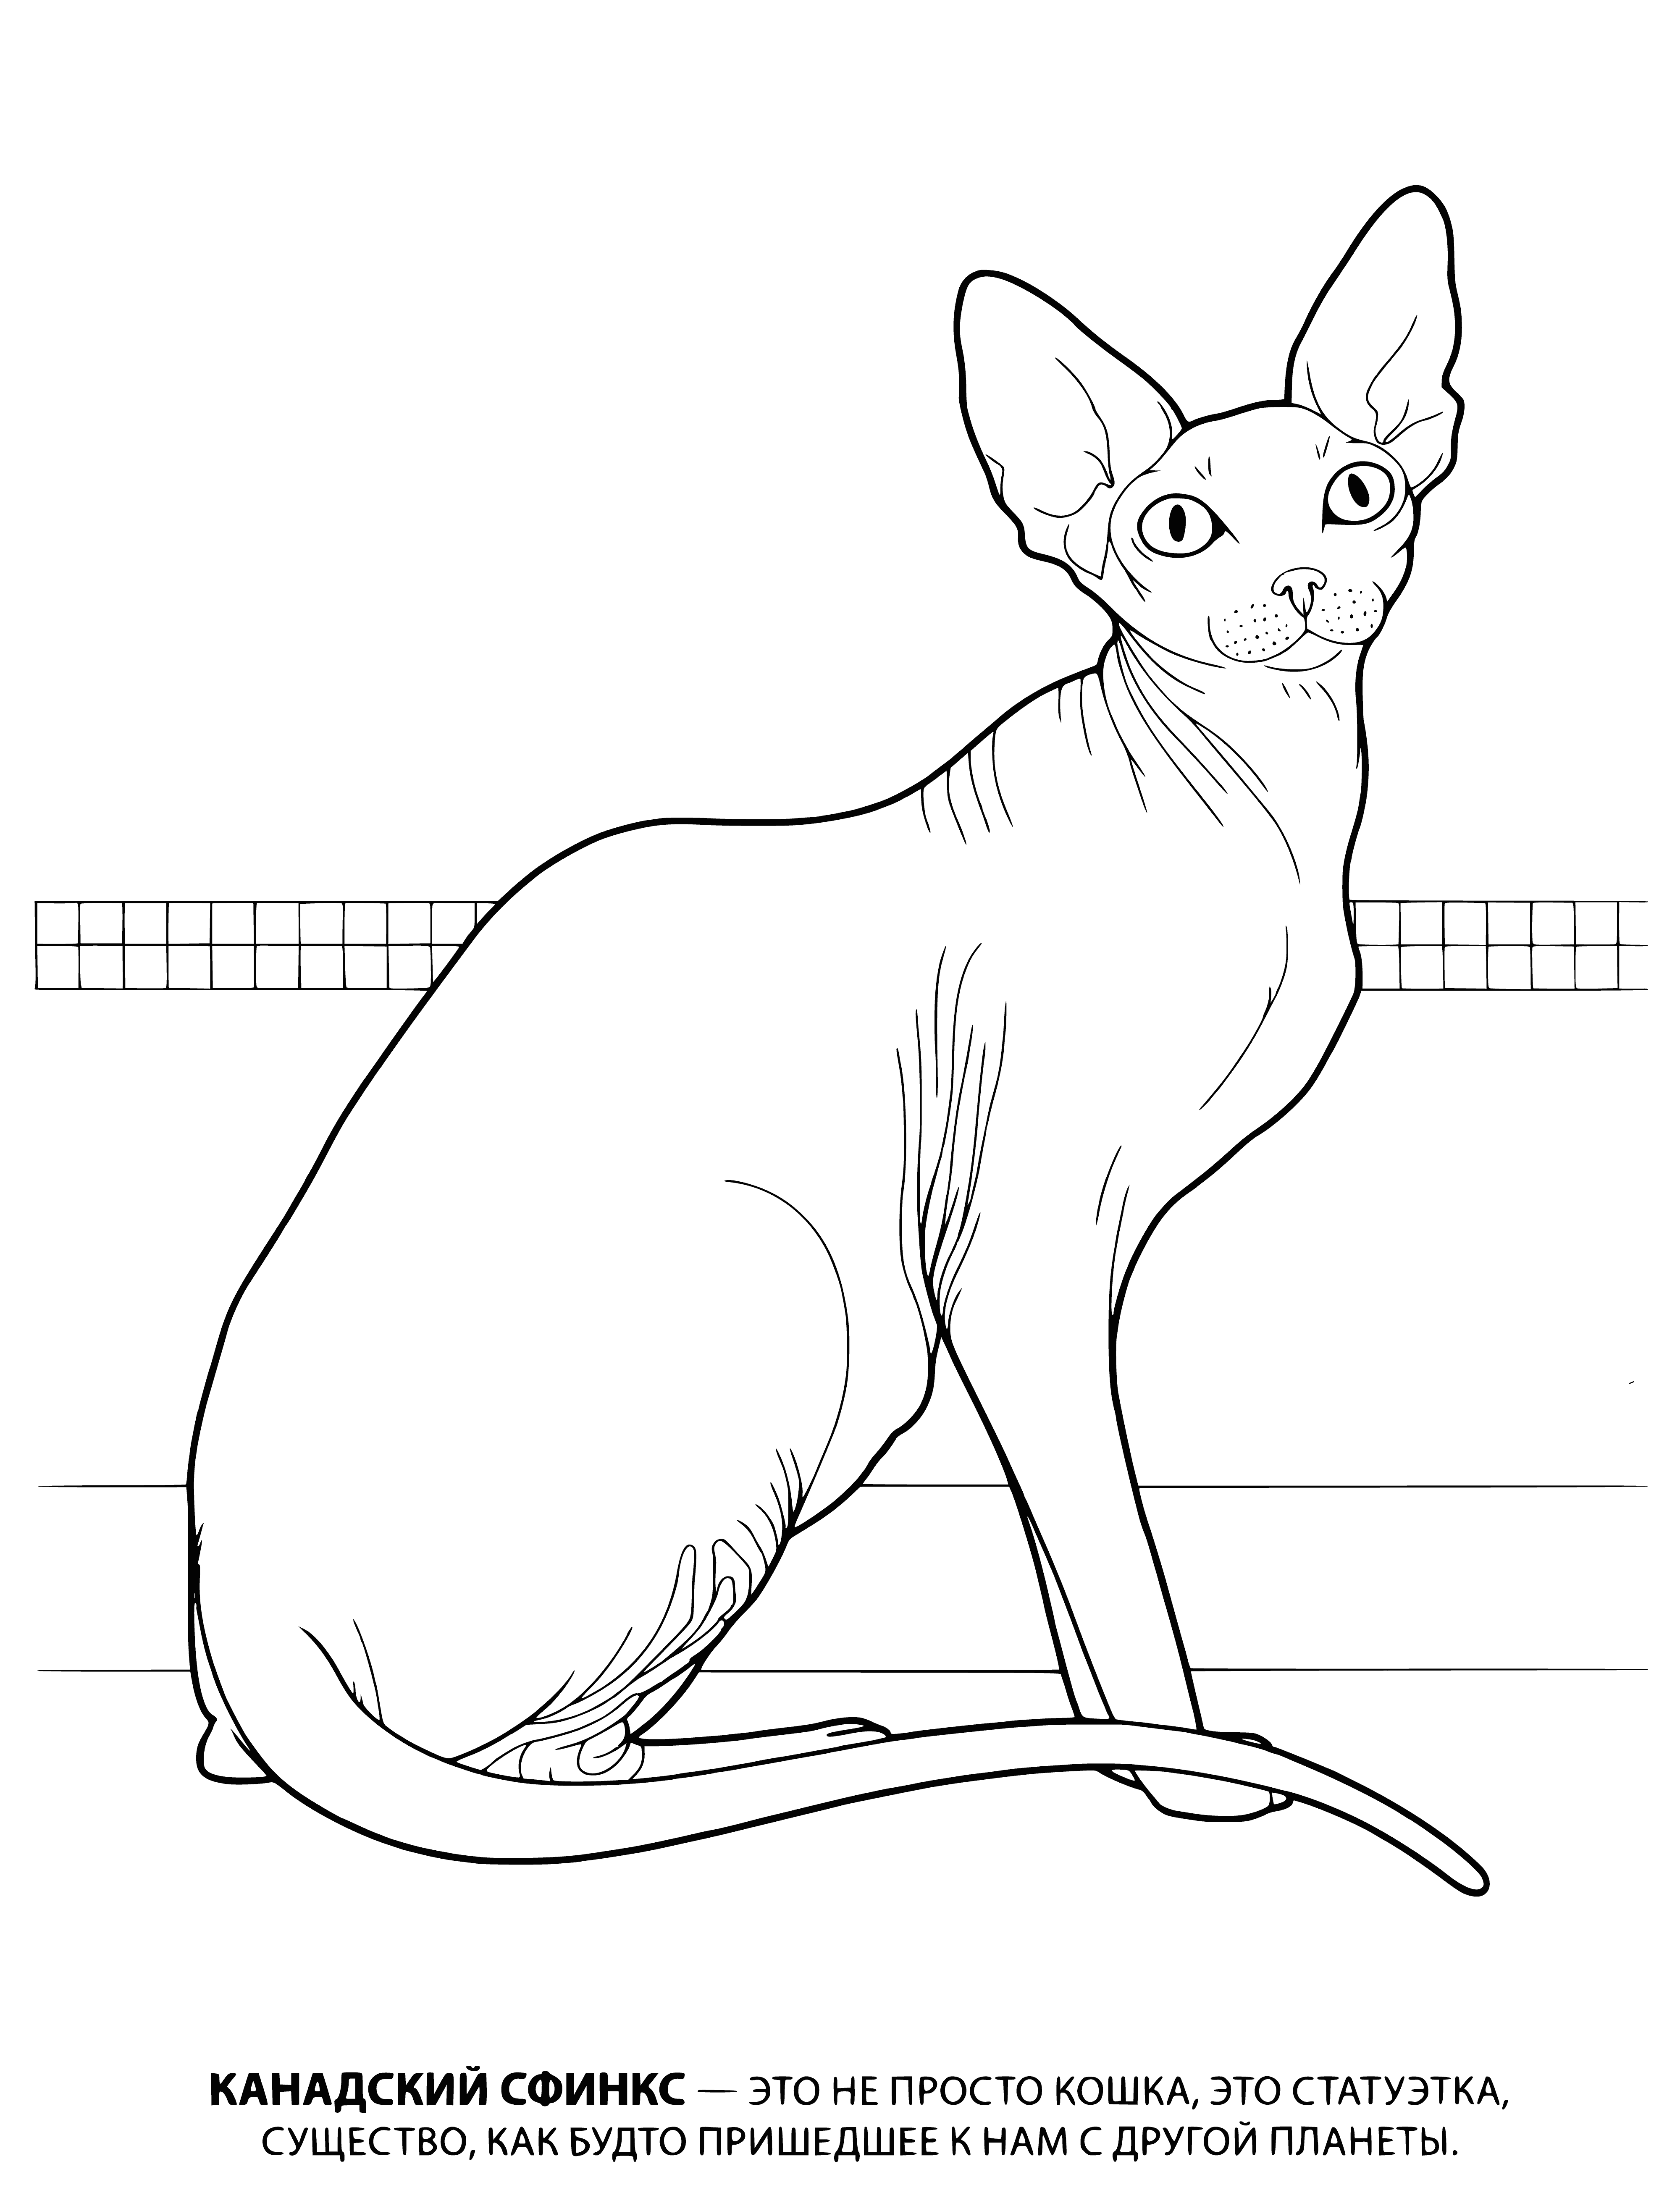 coloring page: The Canadian Sphynx is known for its large ears, long body & short legs. It's affectionate and intelligent.